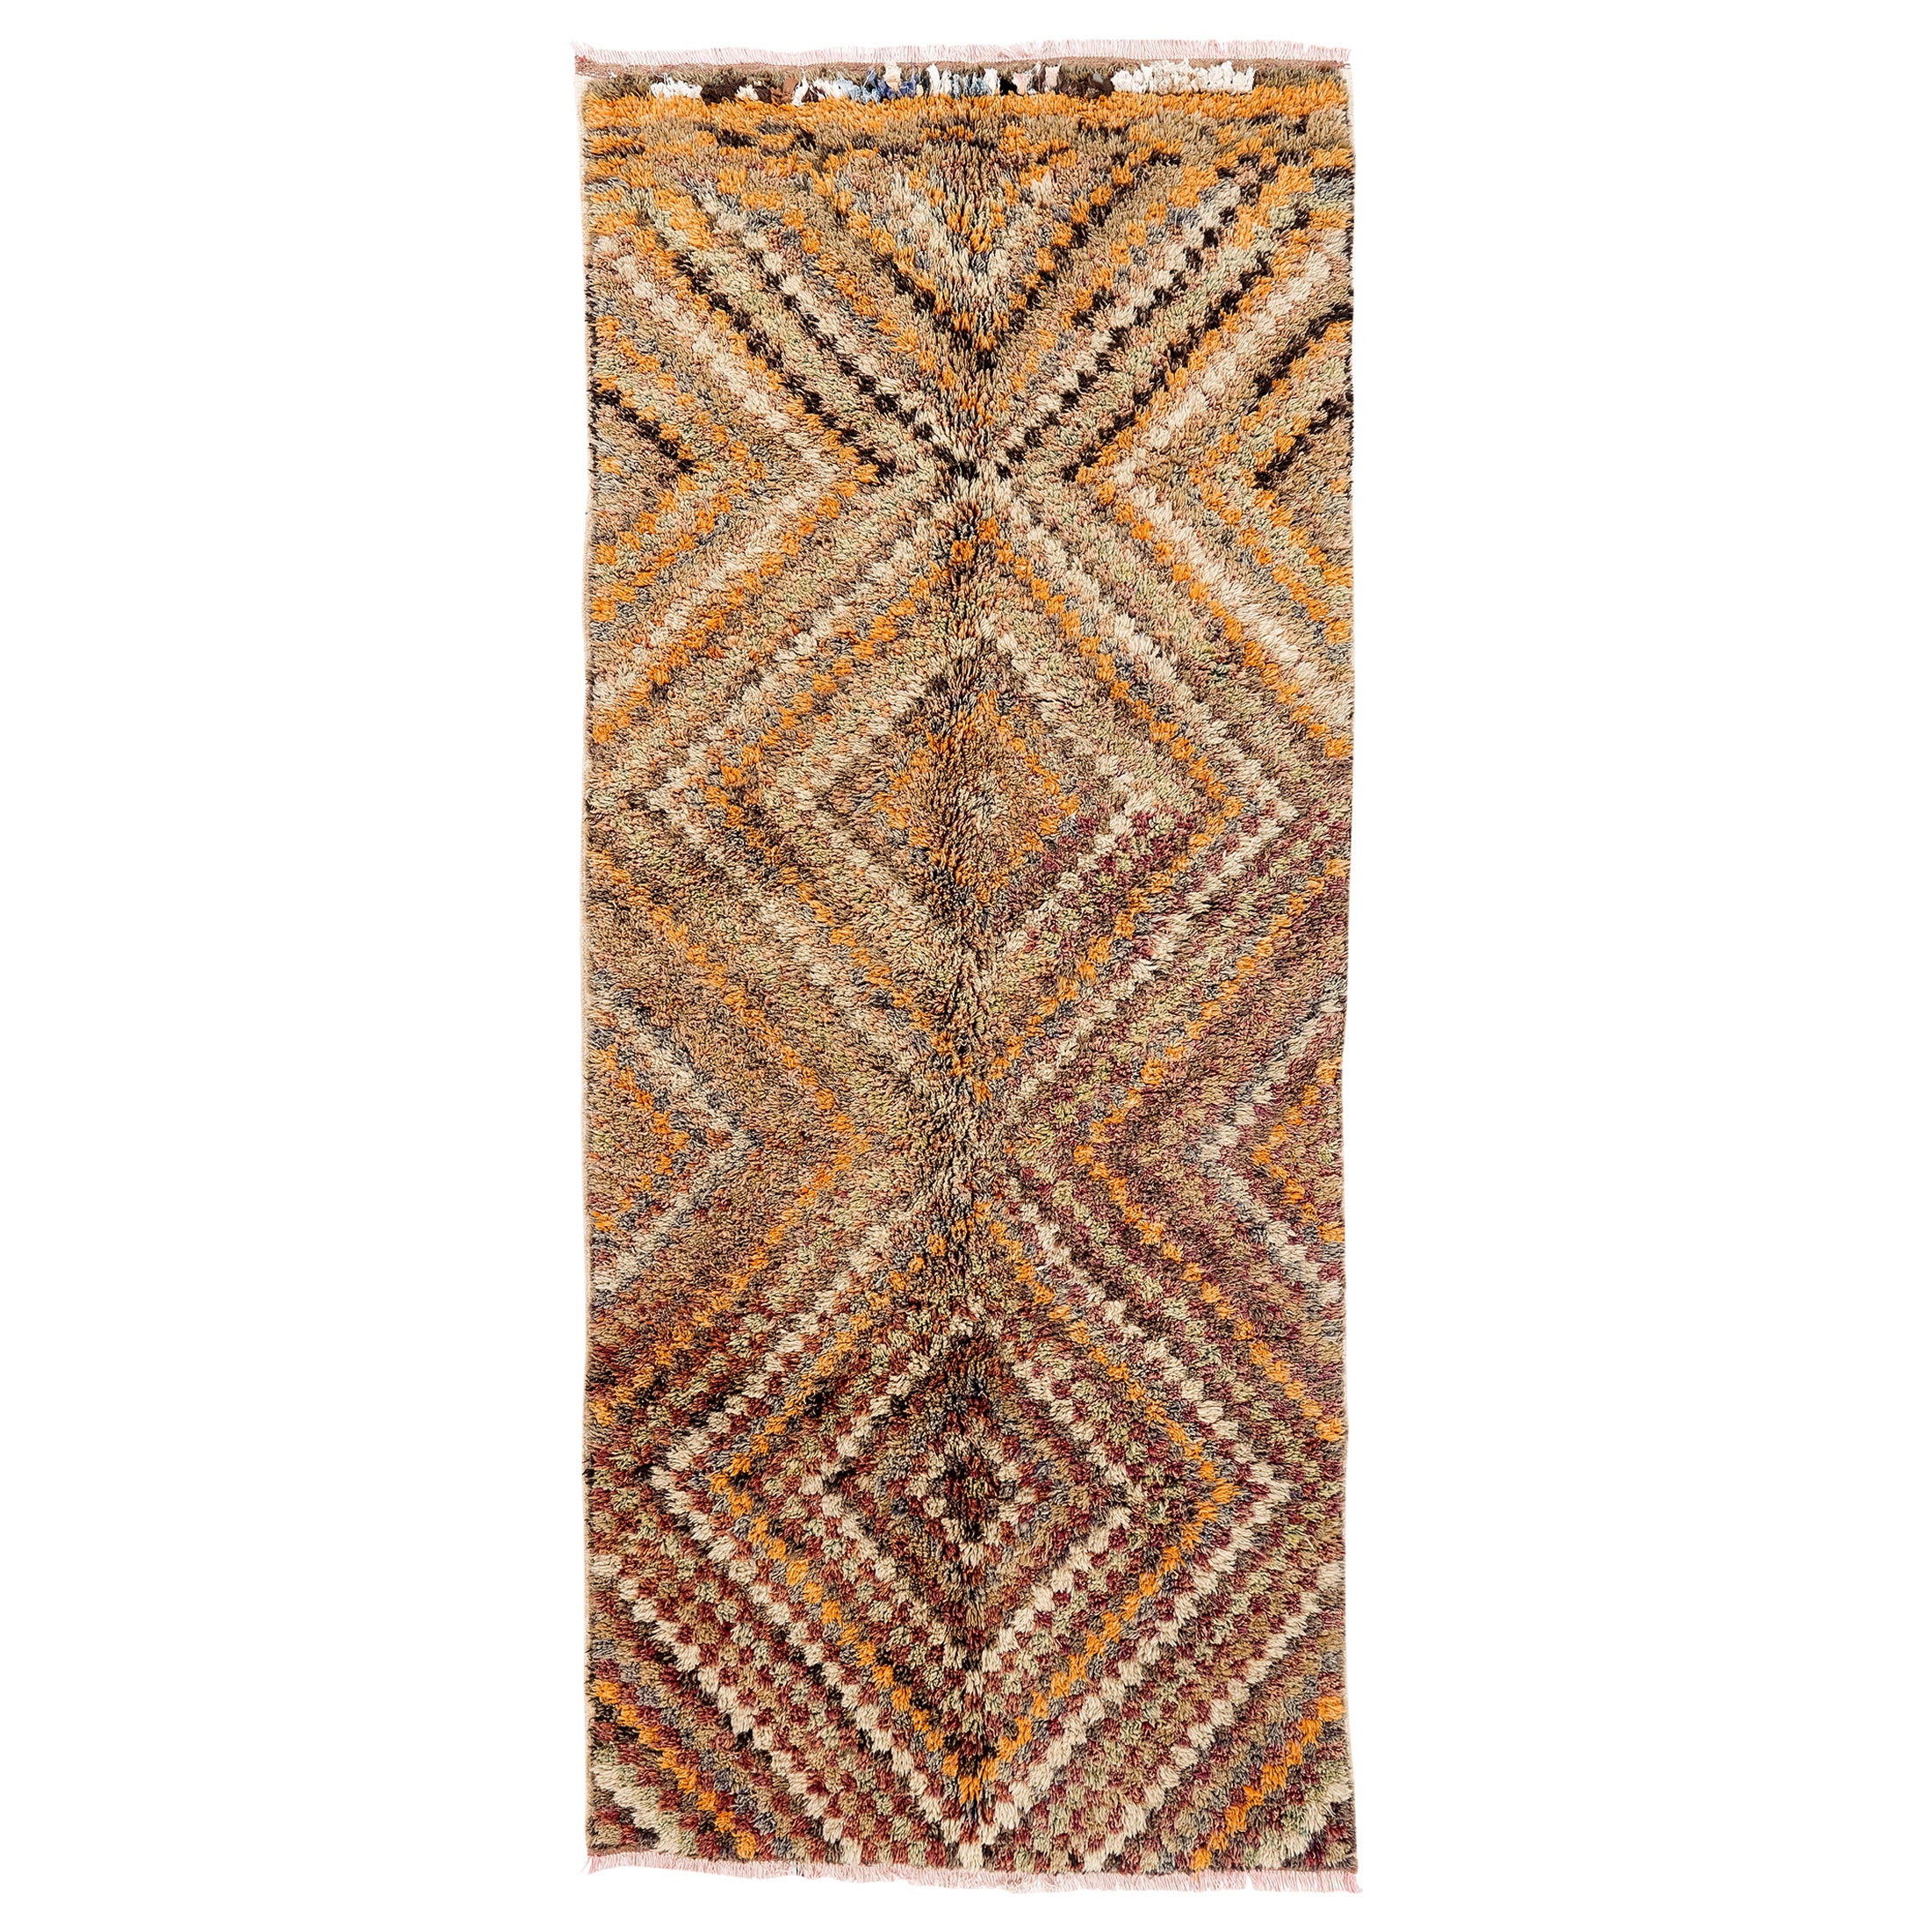 4.3x10 Ft Vintage Handmade Turkish Tulu Checkered Rug in Soft Colors, All Wool For Sale